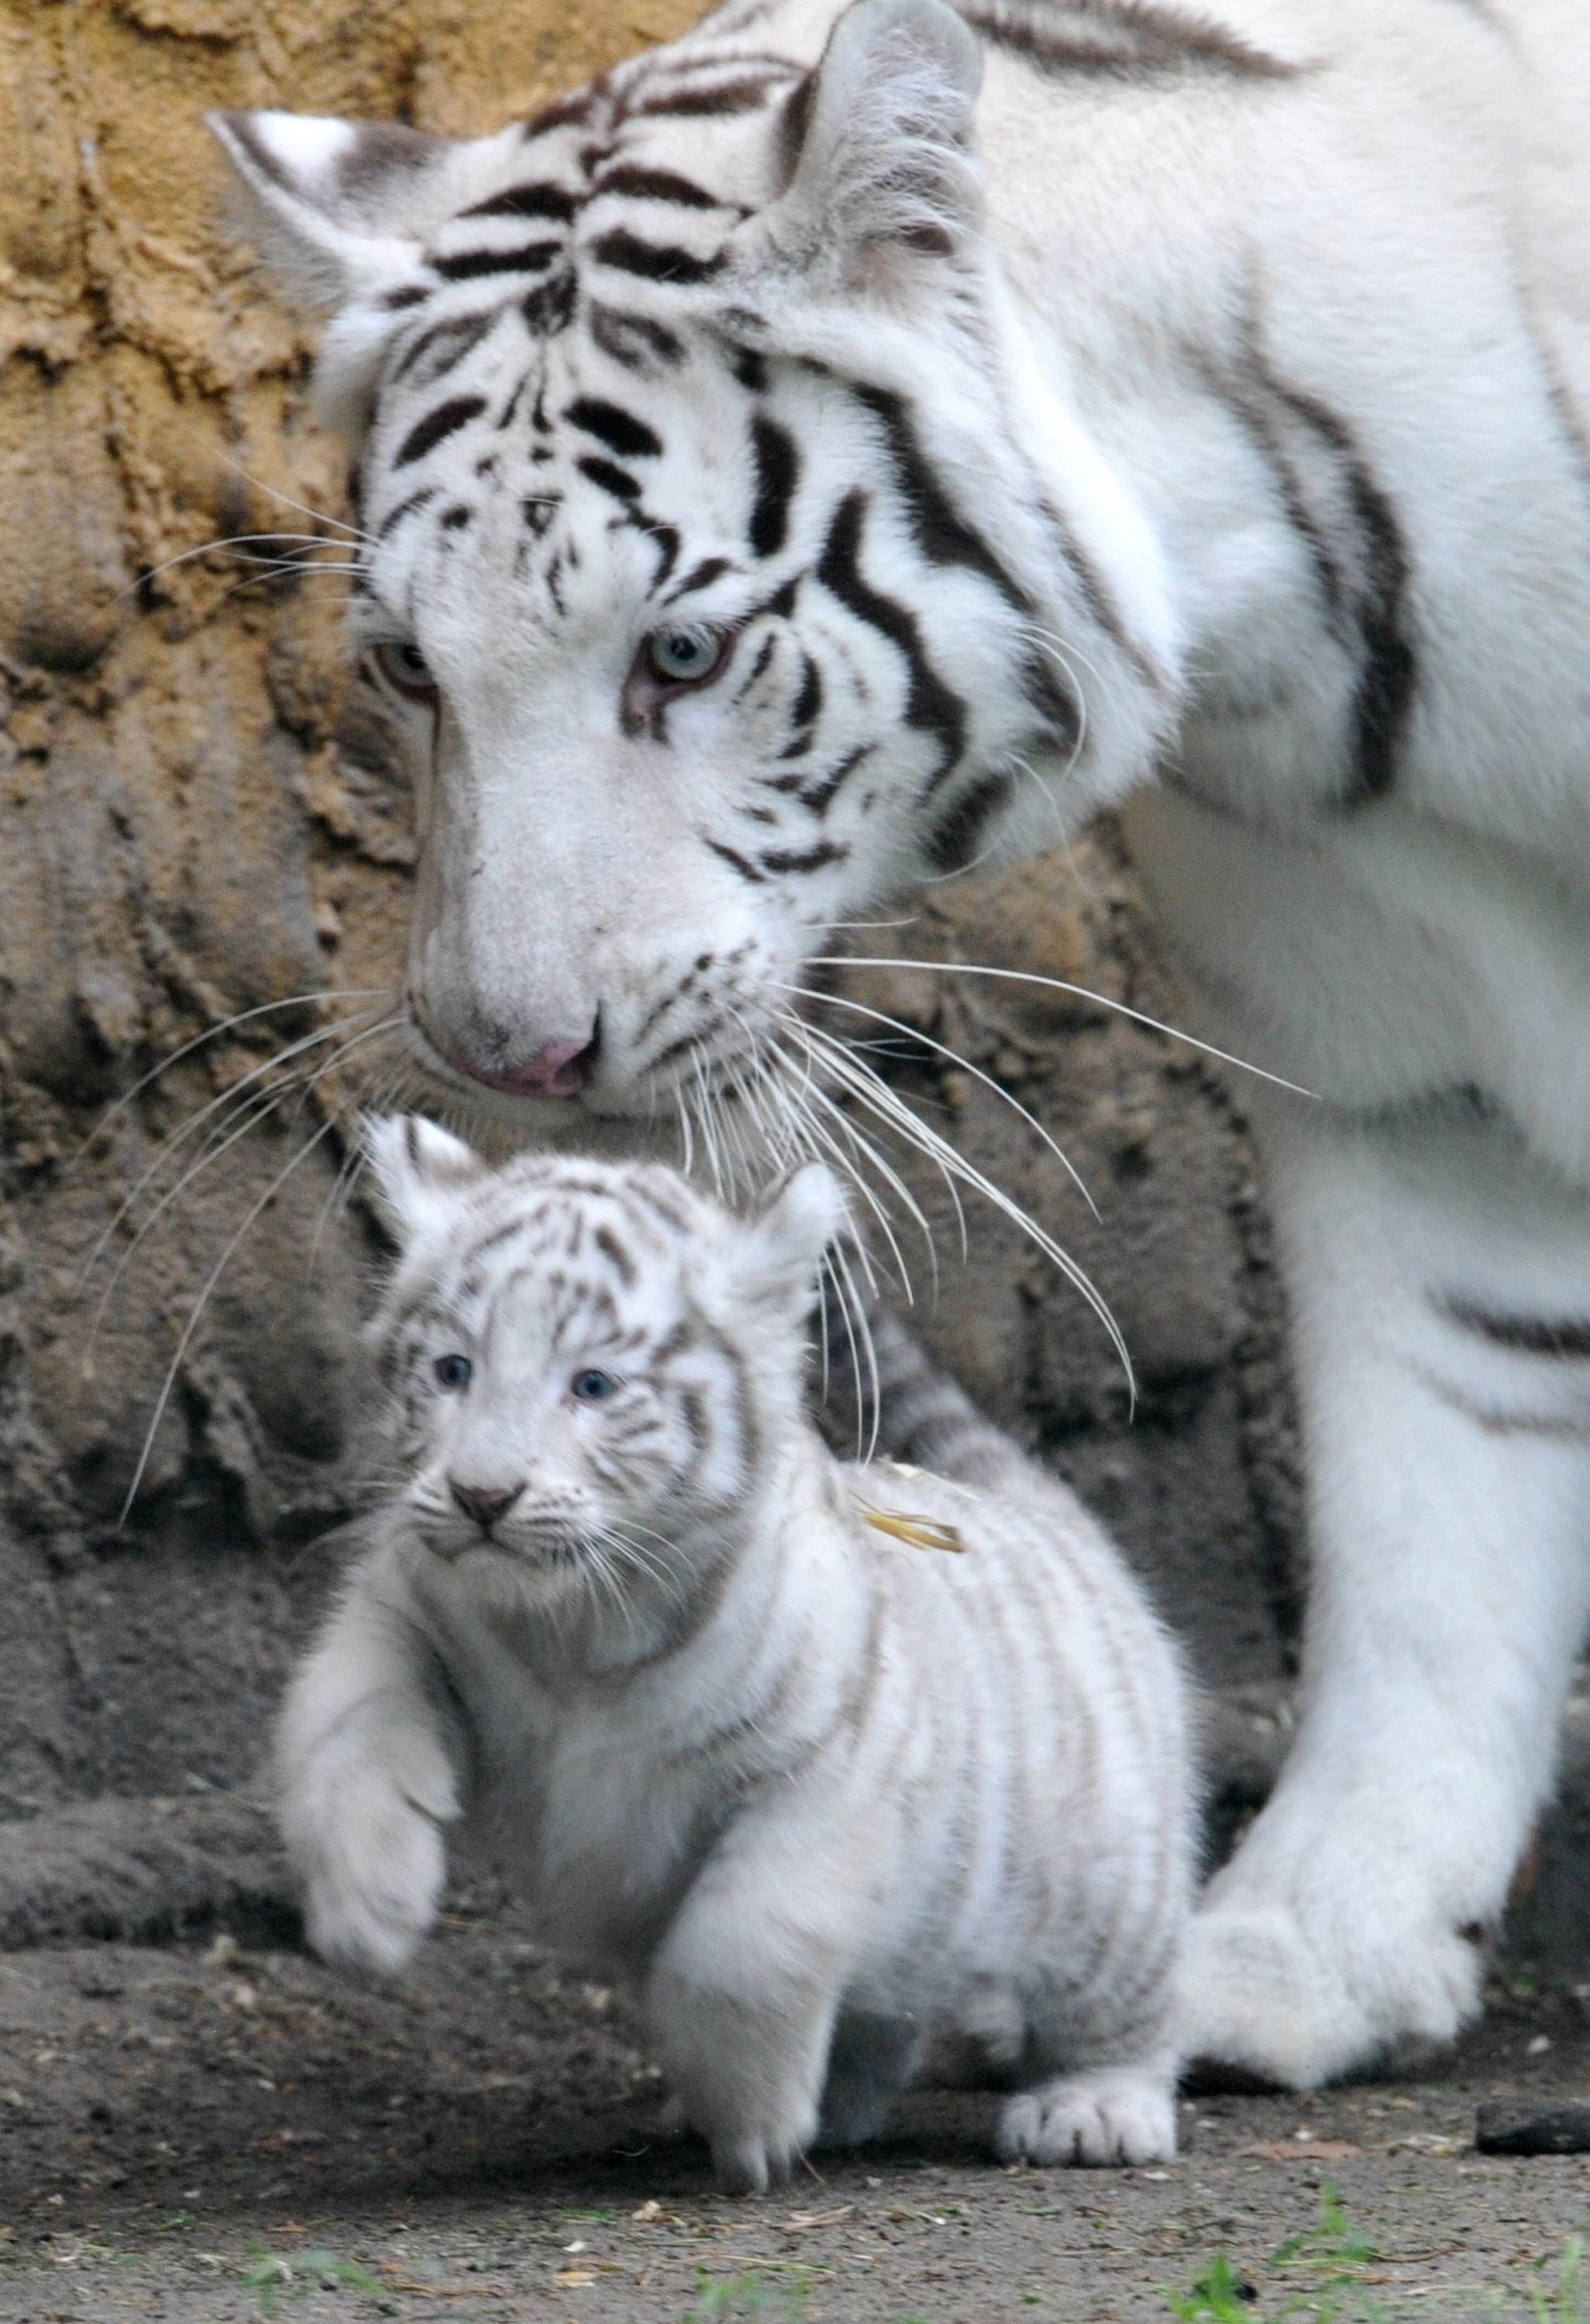 Baby White Tigers For Sale - wallpaper.